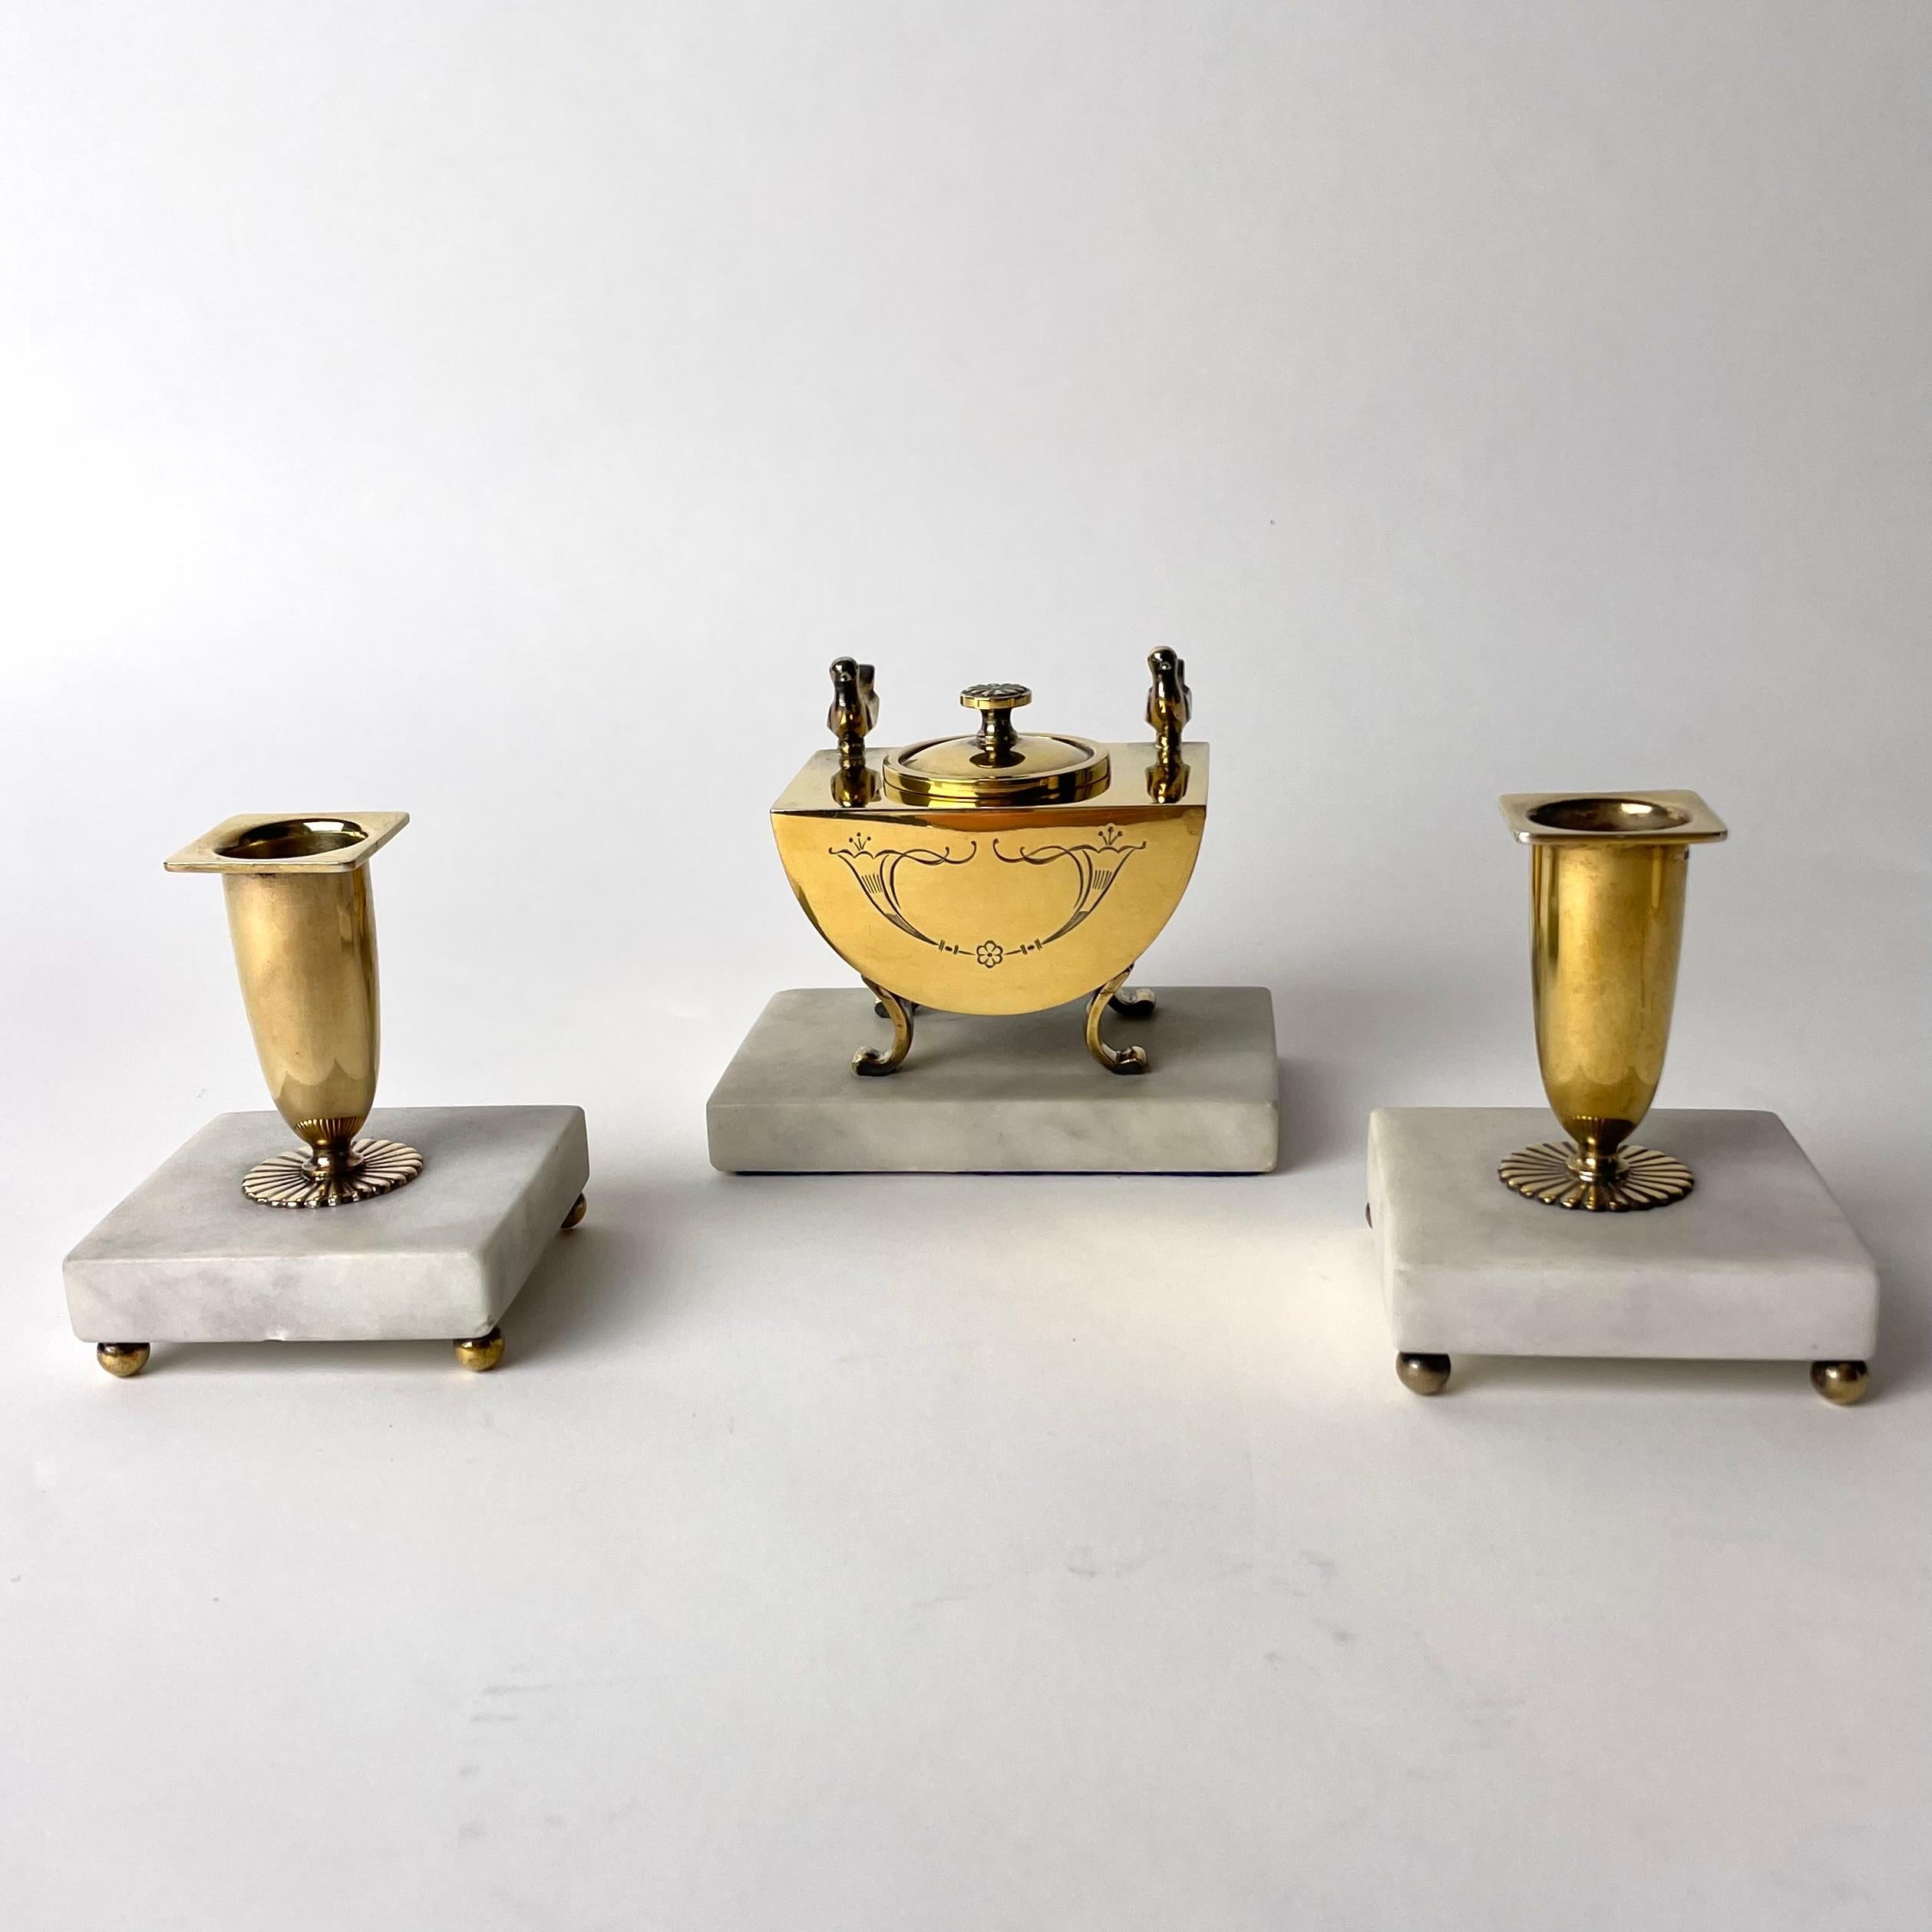 A beautiful Three-piece Desk Set in gilded silver. Very period Swedish Grace from CG Hallbergs in Stockholm, Sweden dated 1929 by Swedish hallmarks. An elegant gilded silver inkstand standing on a Carrara base and a pair of matching gilded silver